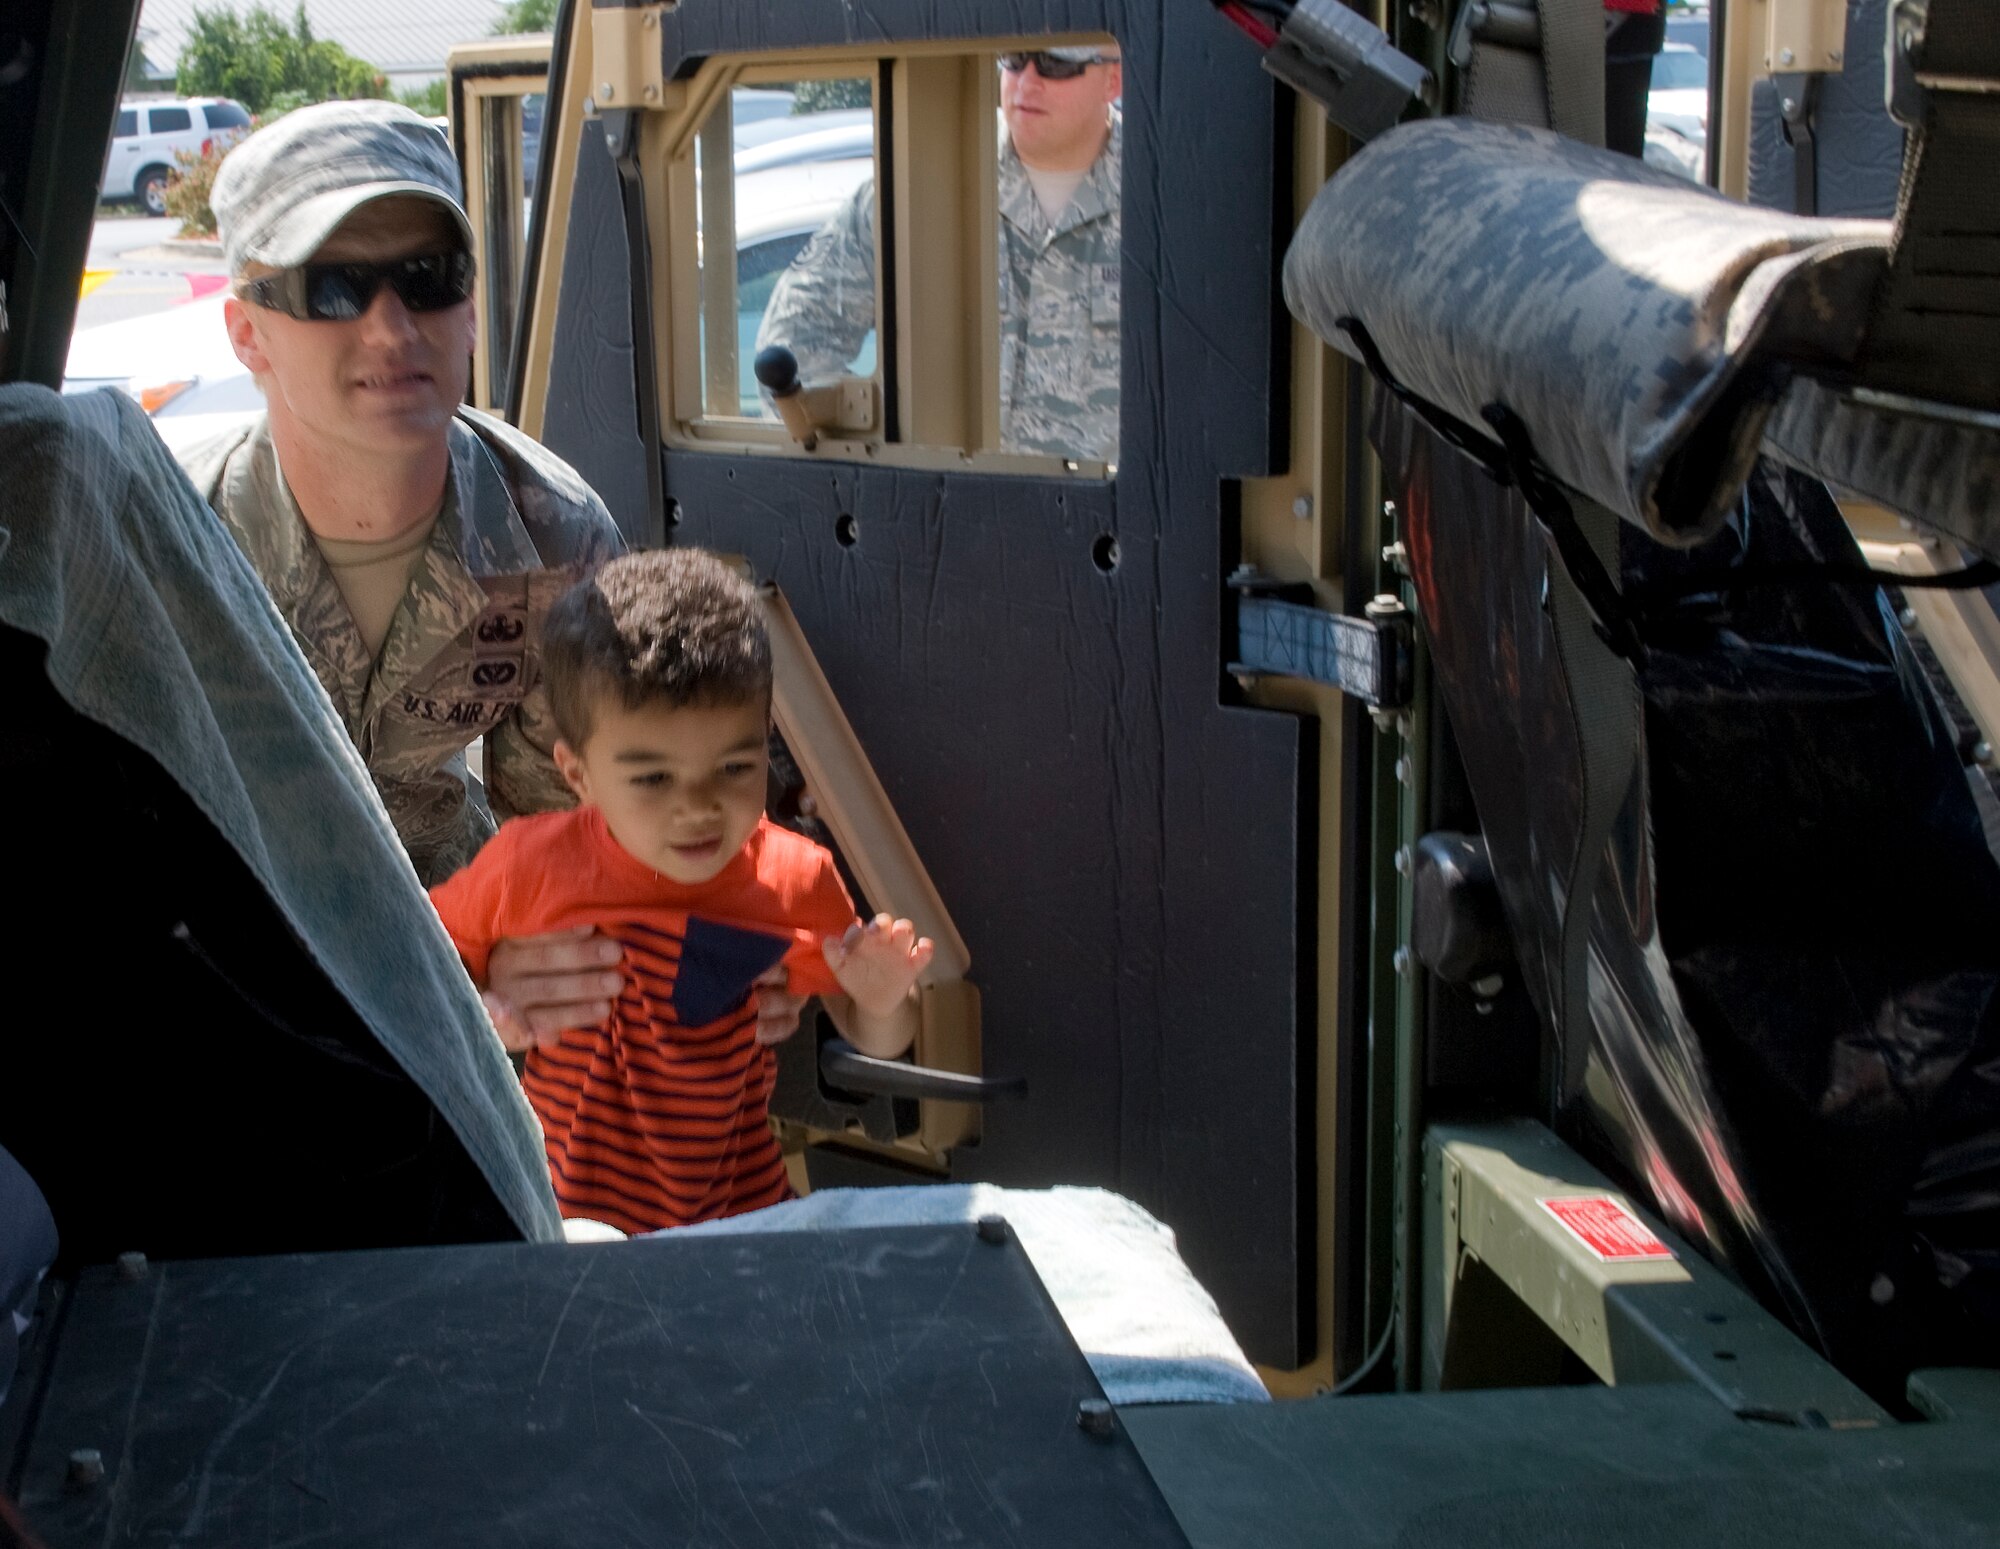 Senior Airman Thomas Johnson, 1st Special Operations Civil Engineer Squadron Explosive Ordinance Disposal technichian, helps a child into a Humvee during the 16th Annual Truck Day at the Destin Community Center in Destin, Fla., Aug. 7, 2014. “Events like this are a great way for us give back to the local community,” said Johnson. (U.S. Air Force photo/Senior Airman Kentavist P. Brackin)